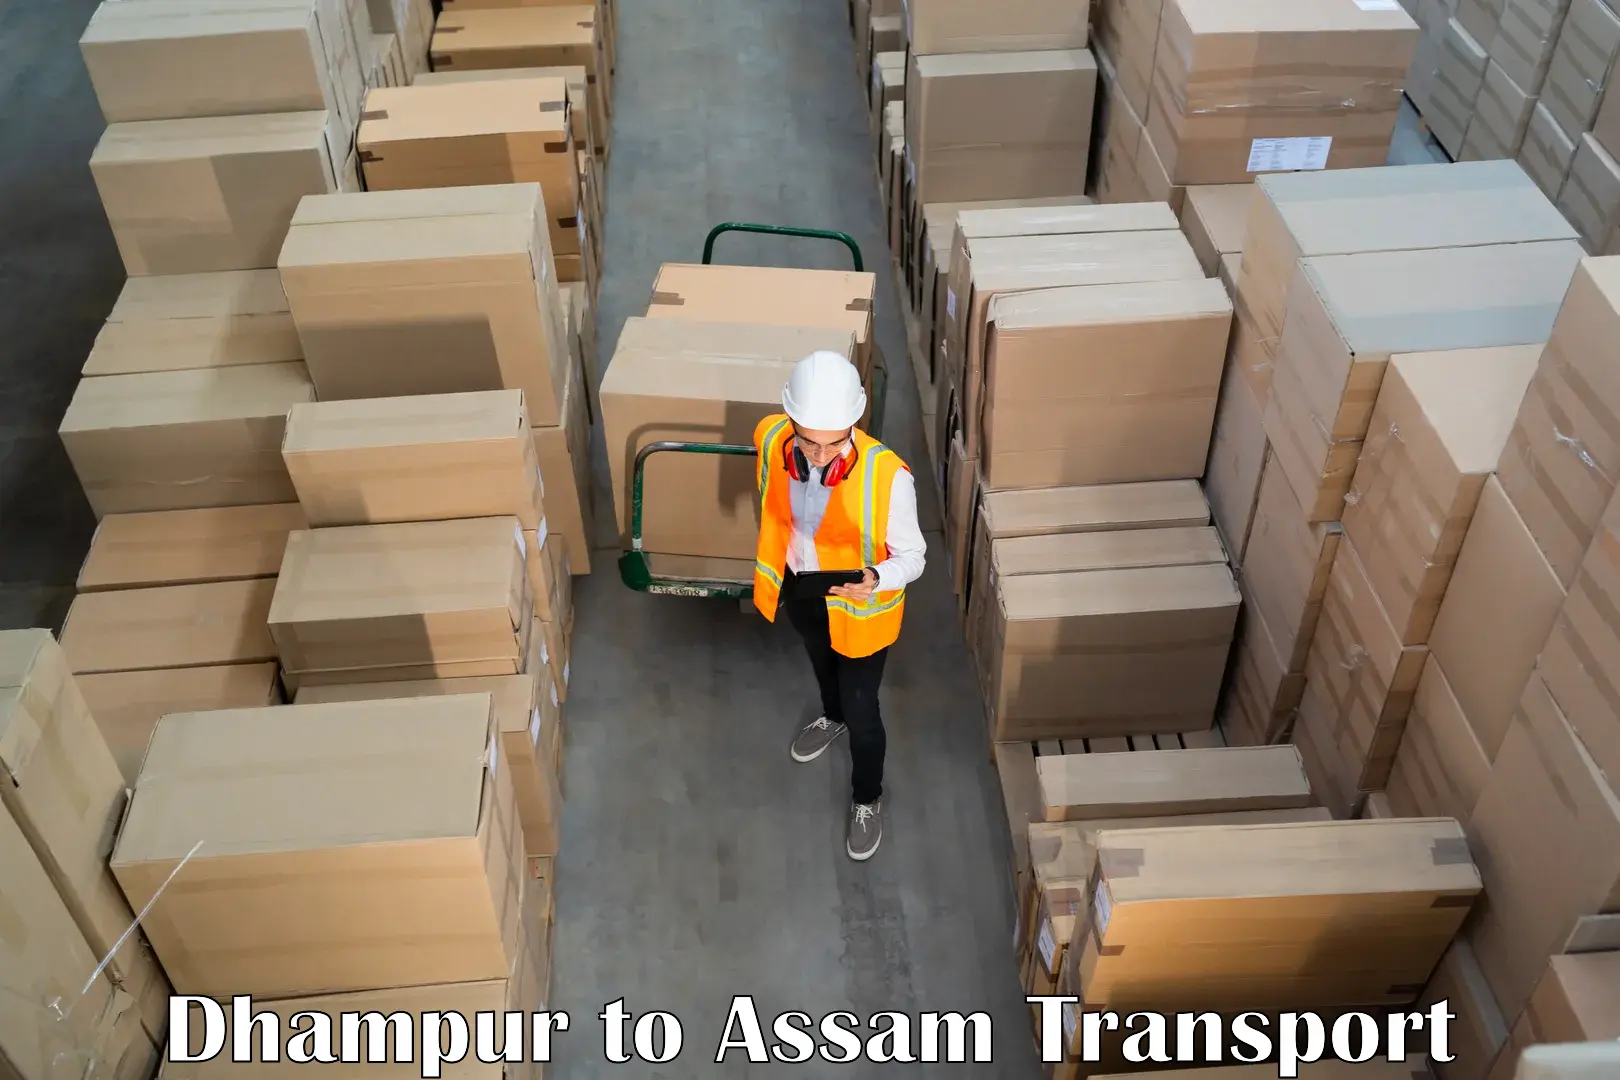 Daily parcel service transport Dhampur to Majuli